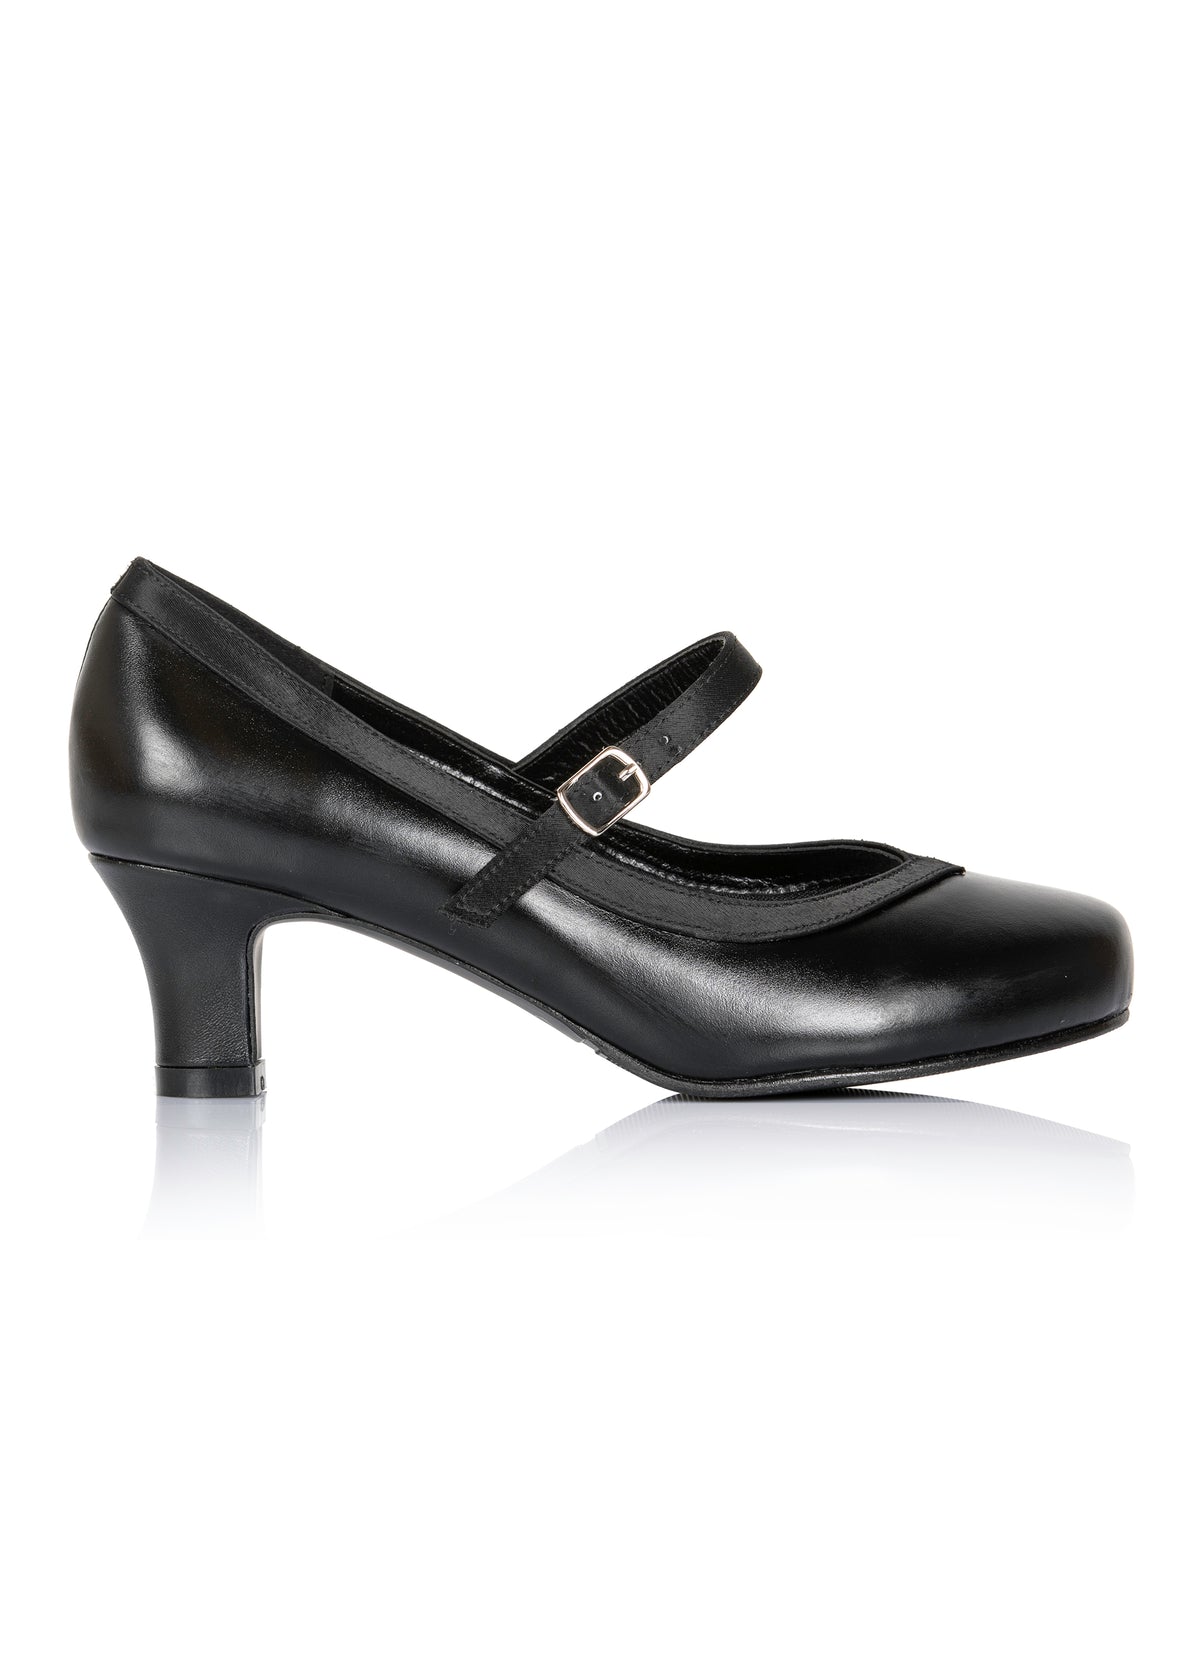 Open toe shoes with buckle straps - black leather, wide lace